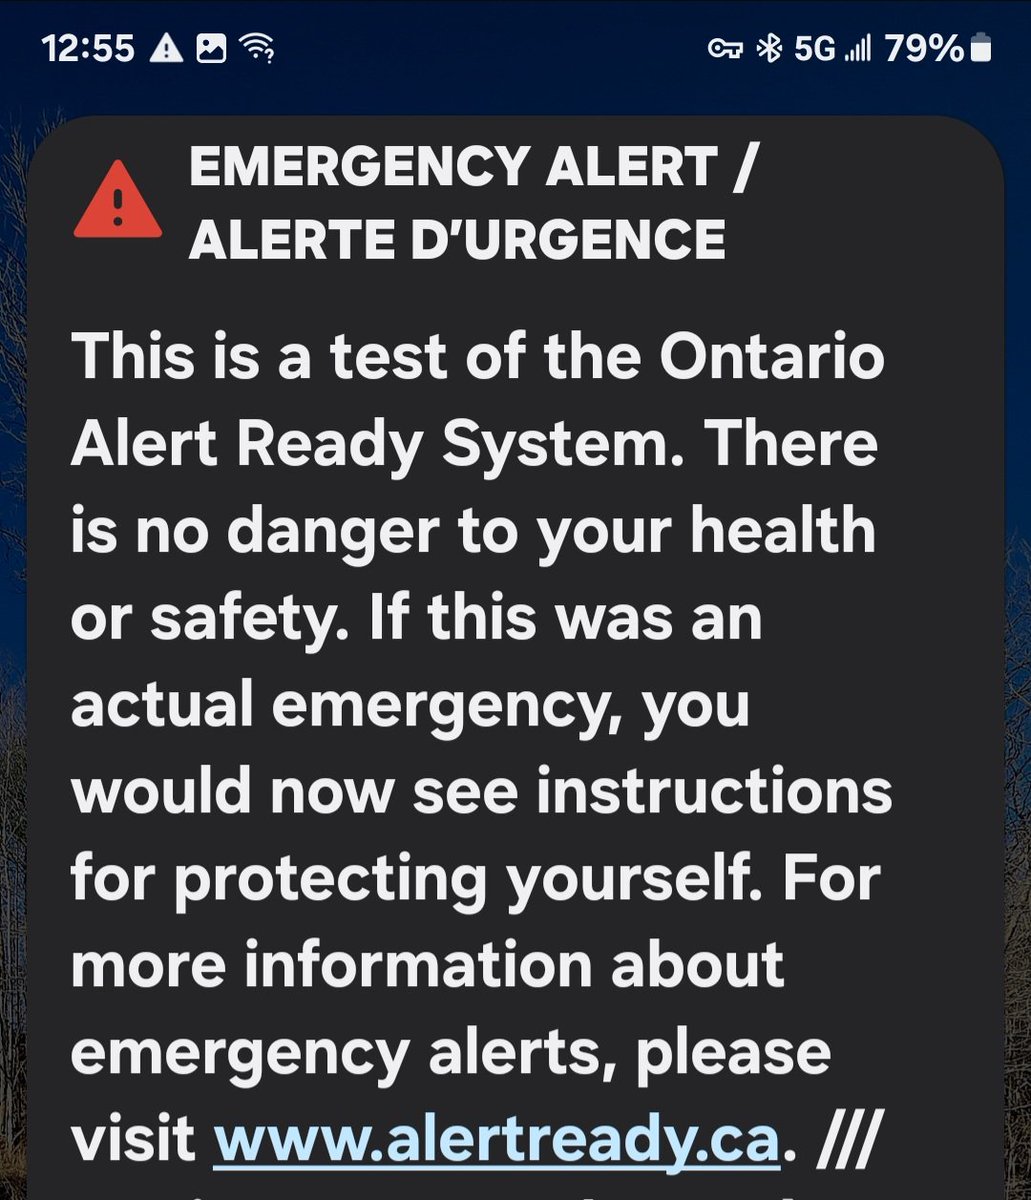 An emergency alert test in Ontario...

I wonder what fuckery they plan on unleashing on us now.